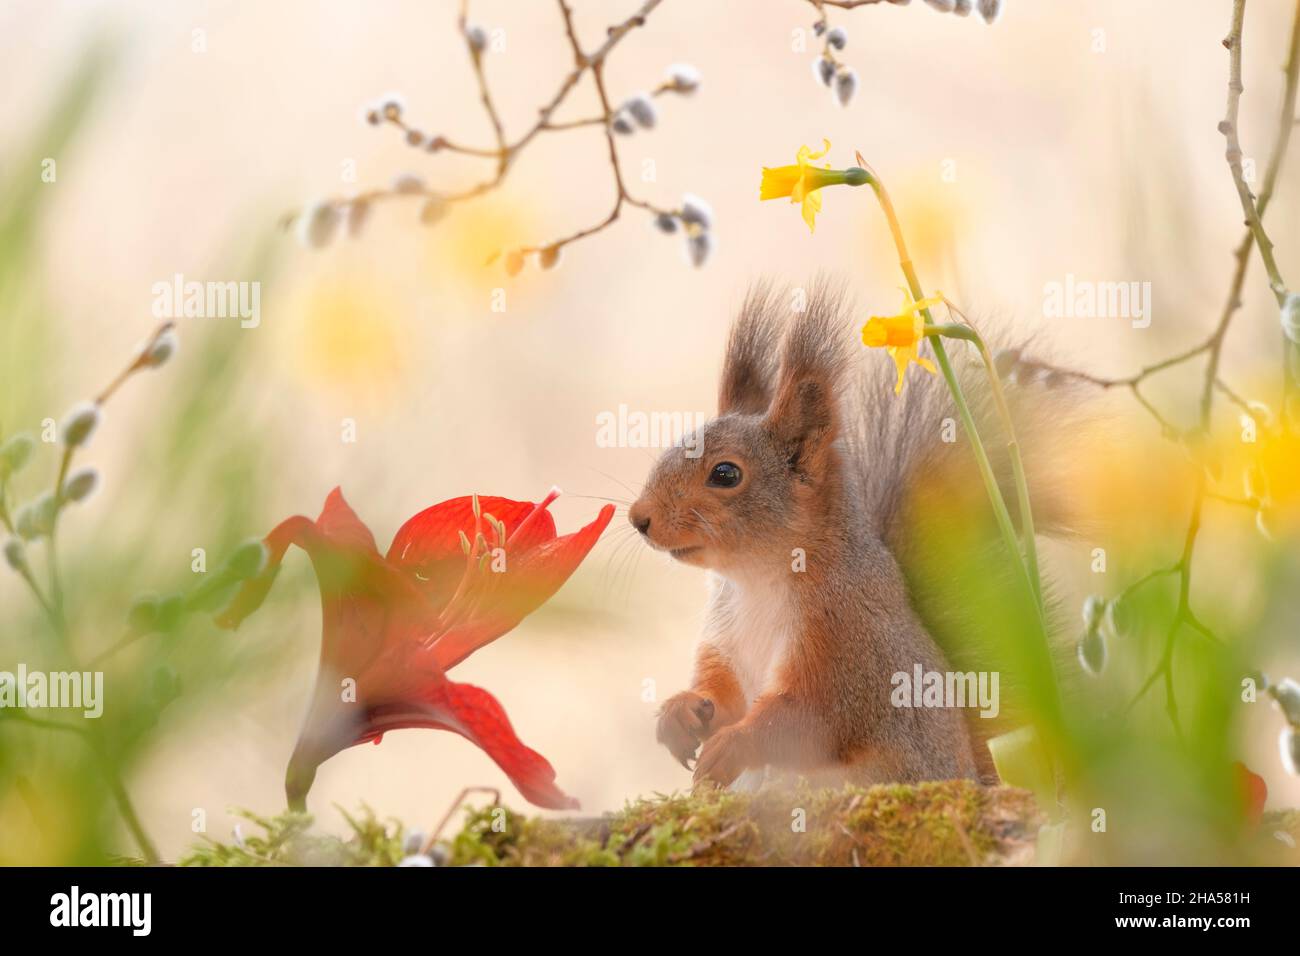 red squirrel is standing behind daffodil,willow and amaryllis flowers Stock Photo